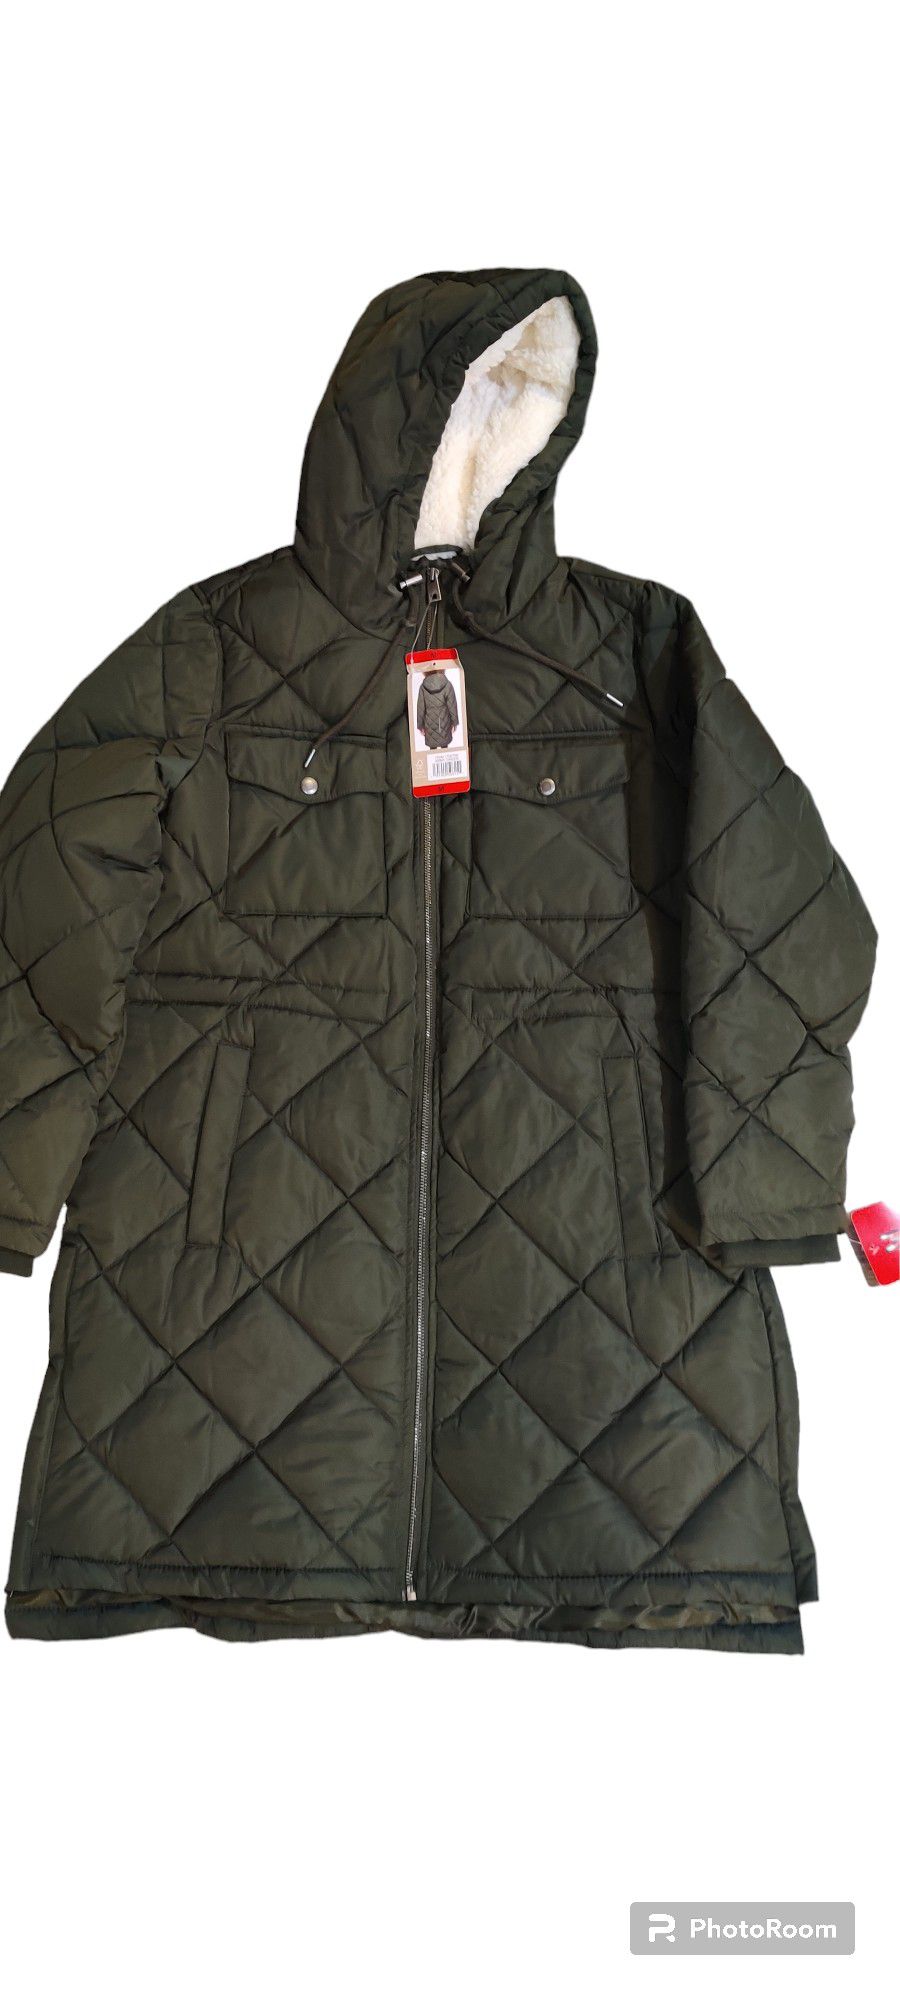 Levi's Women's Soft Sherpa Lined Diamond Quilted Long Parka Jacke